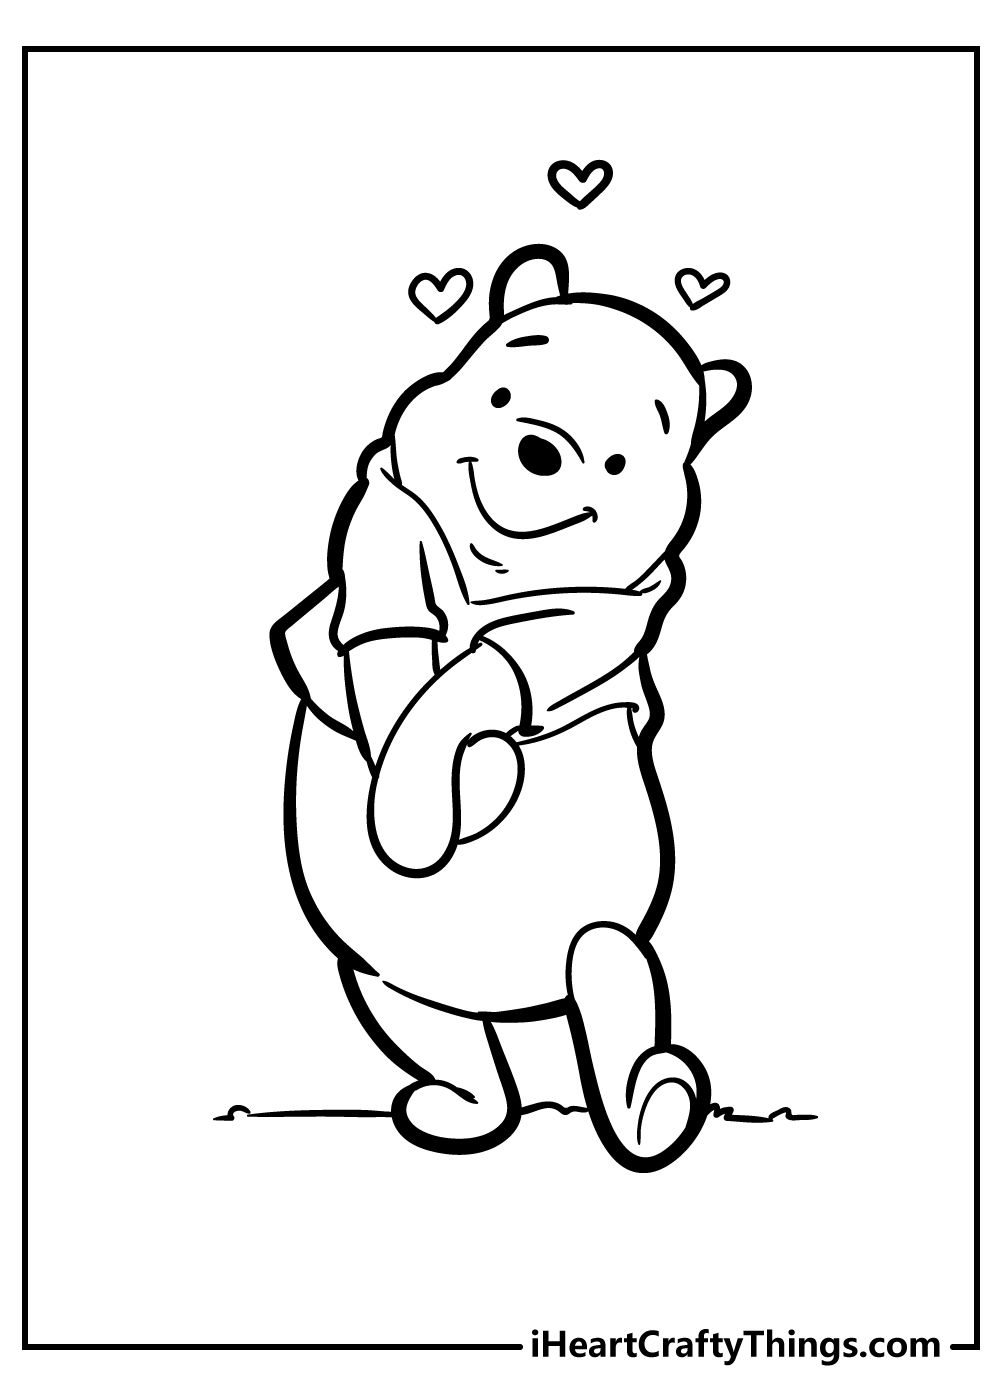 Winnie the pooh coloring pages winnie the pooh drawing coloring pages winnie the pooh